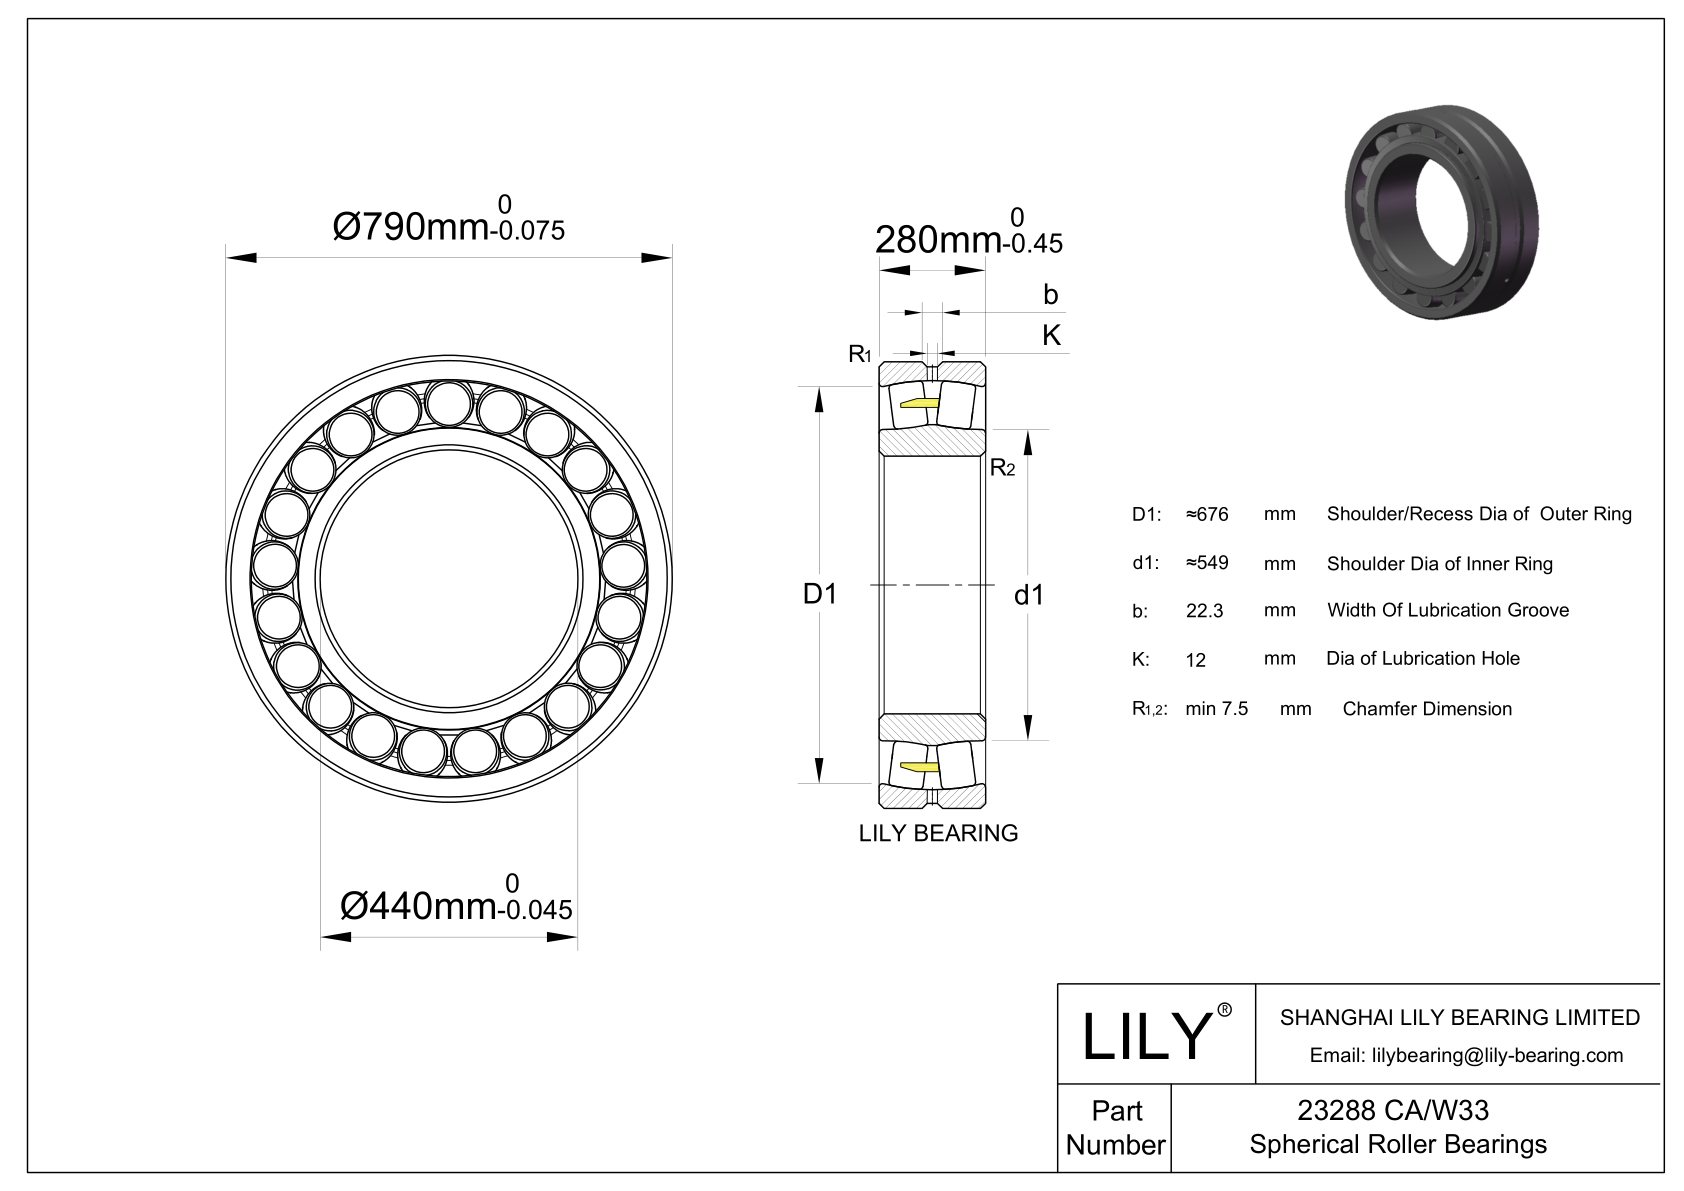 23288 CA/W33 Double Row Spherical Roller Bearing cad drawing